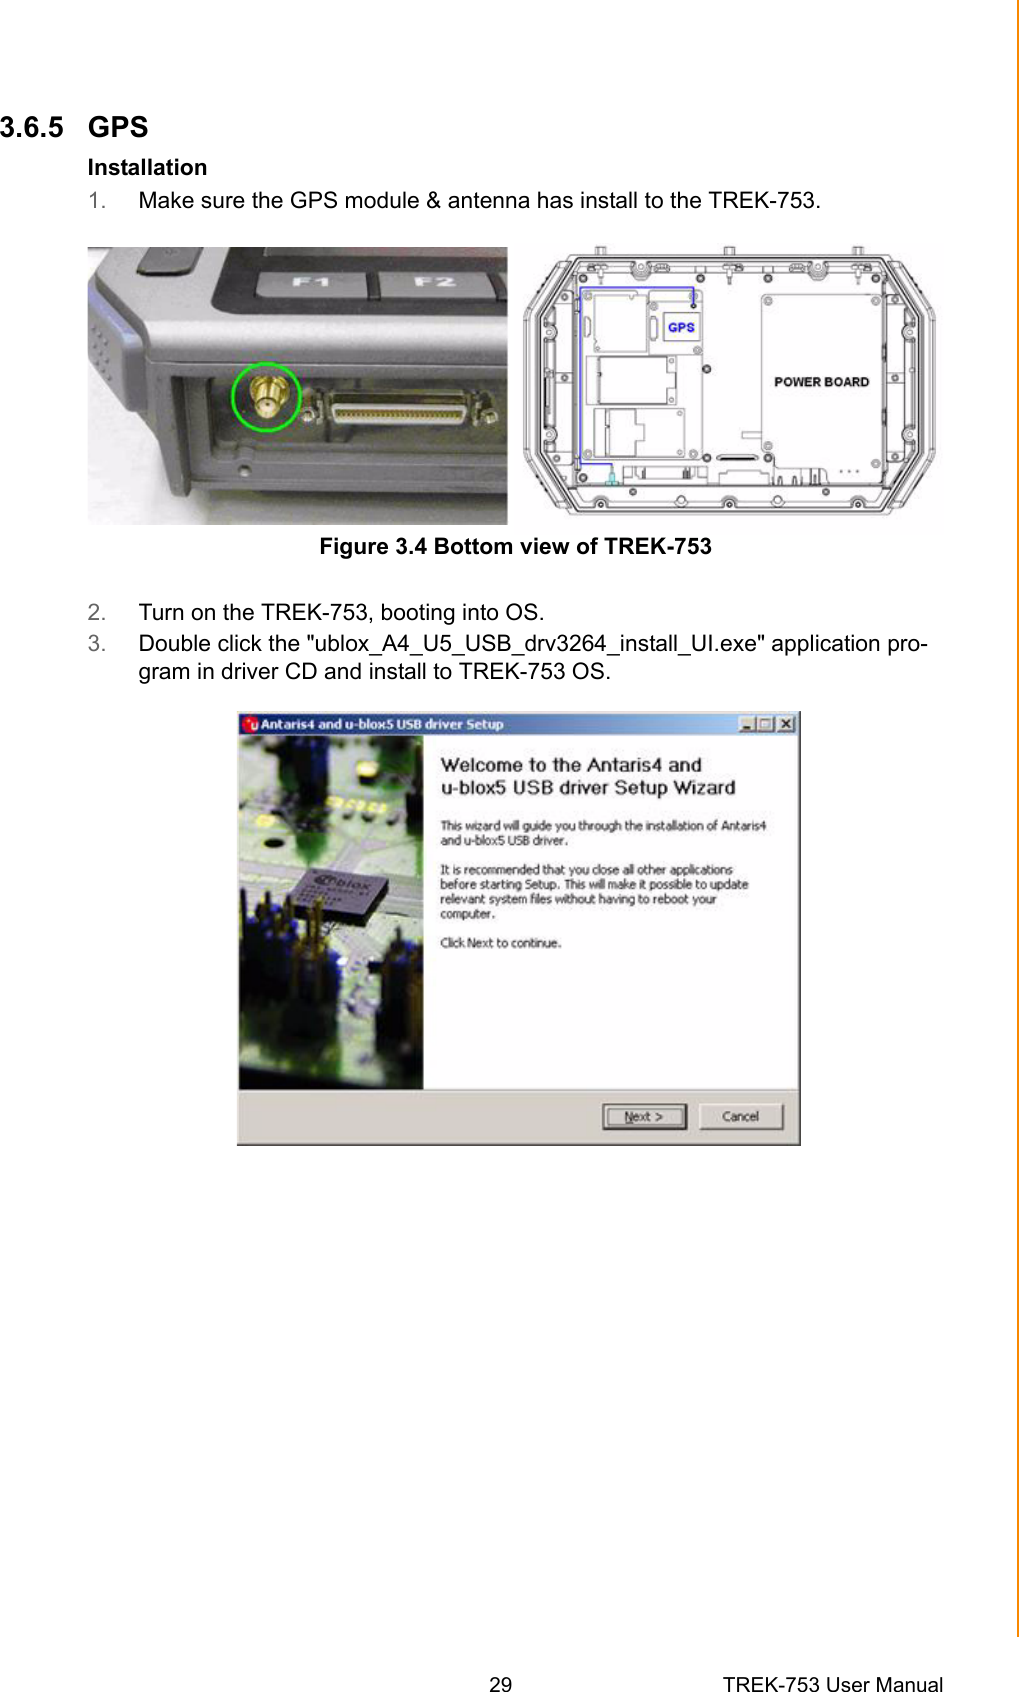 29 TREK-753 User ManualChapter 3 Hardware &amp; Peripheral Installation3.6.5 GPSInstallation1. Make sure the GPS module &amp; antenna has install to the TREK-753.Figure 3.4 Bottom view of TREK-7532. Turn on the TREK-753, booting into OS.3. Double click the &quot;ublox_A4_U5_USB_drv3264_install_UI.exe&quot; application pro-gram in driver CD and install to TREK-753 OS.